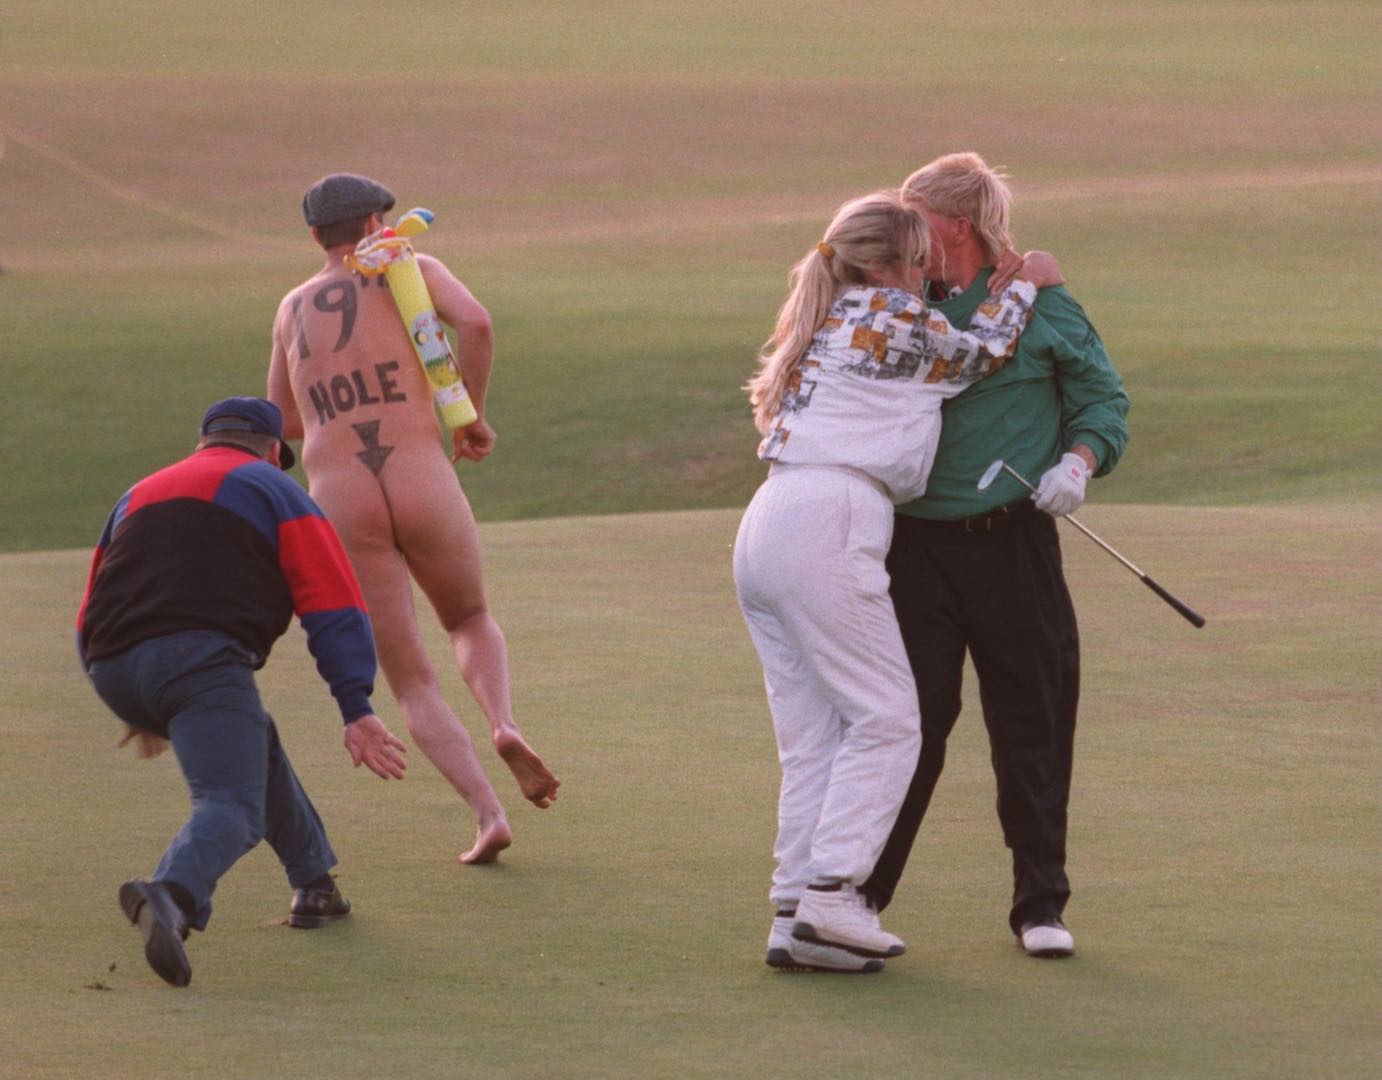 John Daly's Top 5 Moments. 